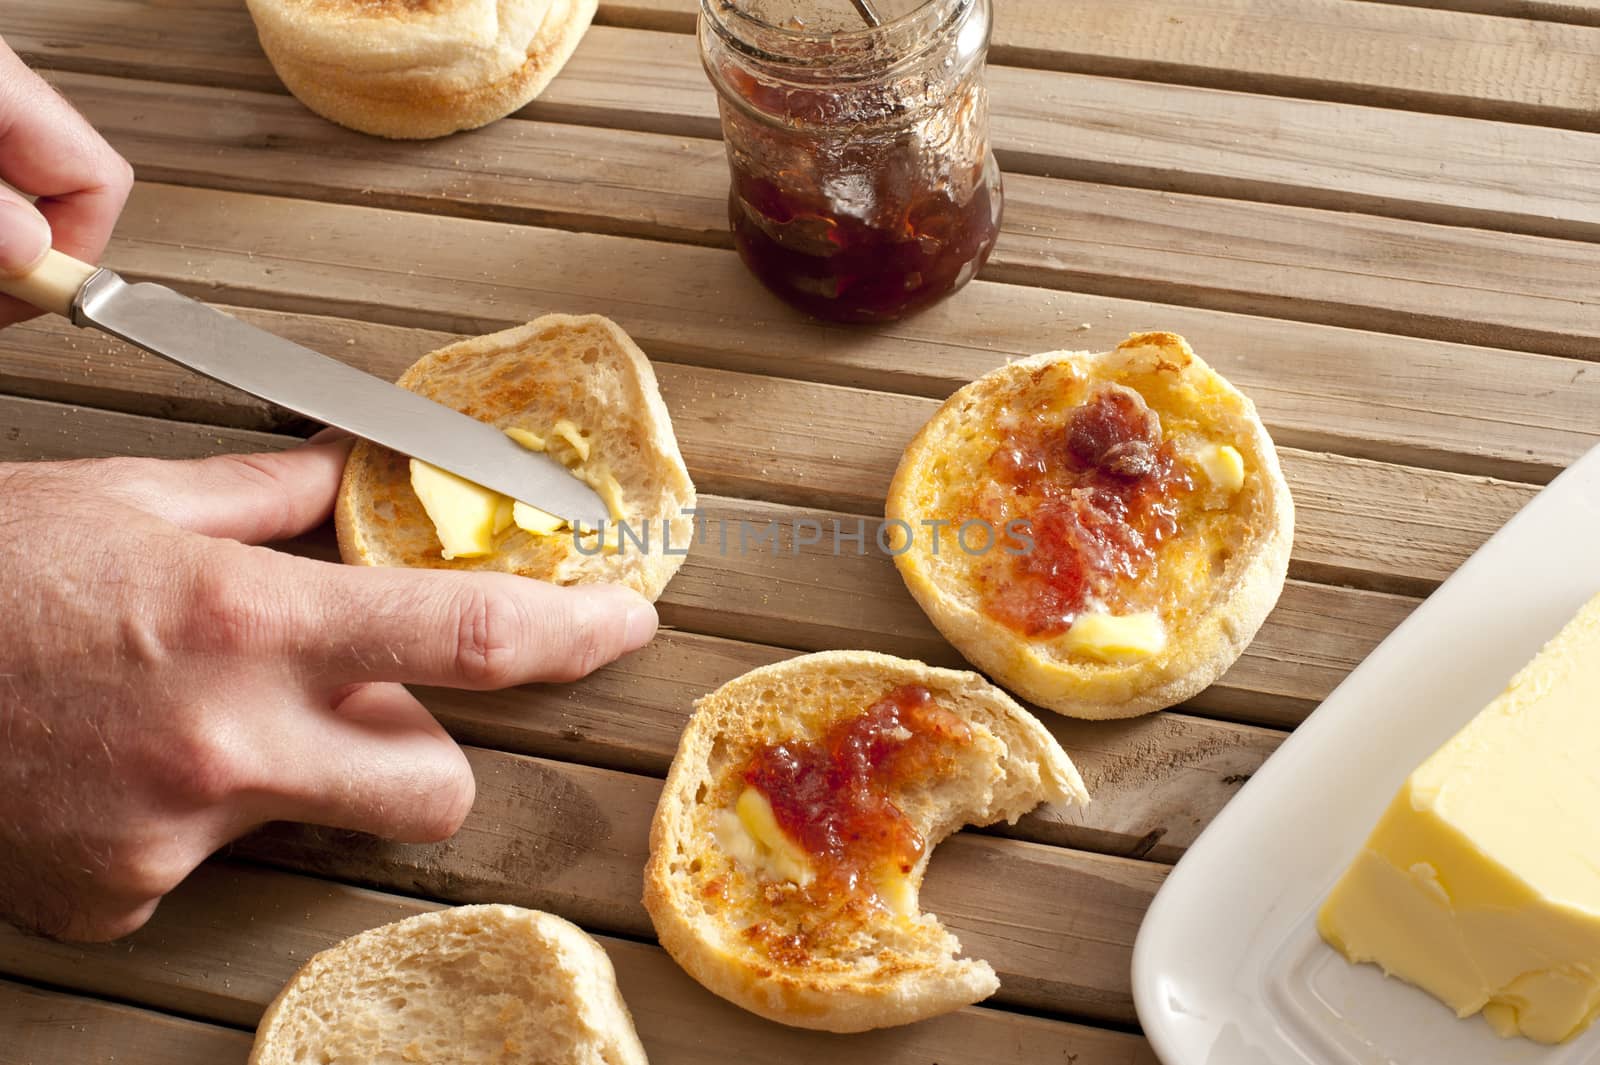 Pair of hands using knife to spread strawberry marmalade on toasted english muffins next to jelly jar and yellow stick of butter